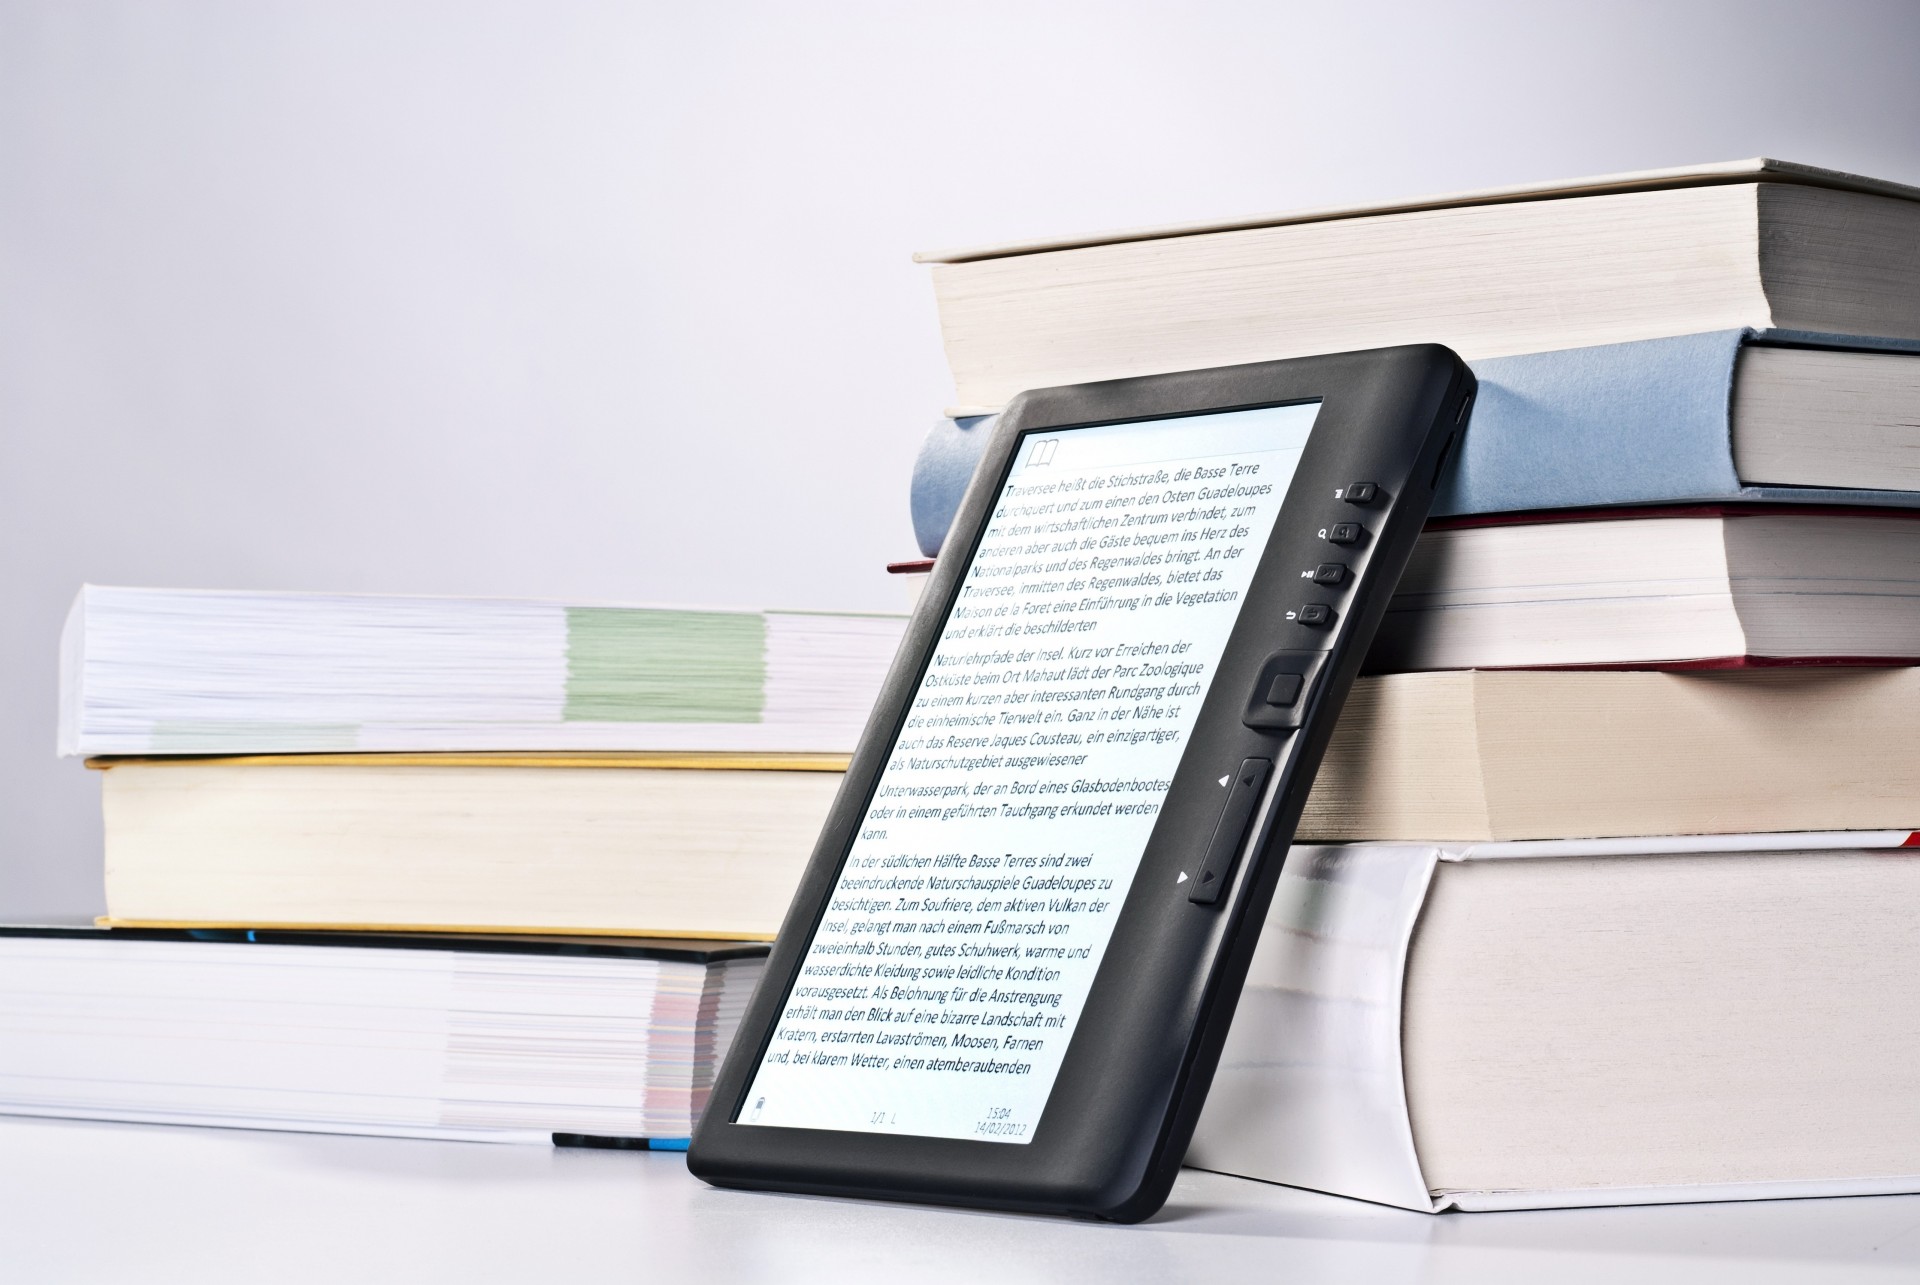 E-books for students: compatibility with textbooks